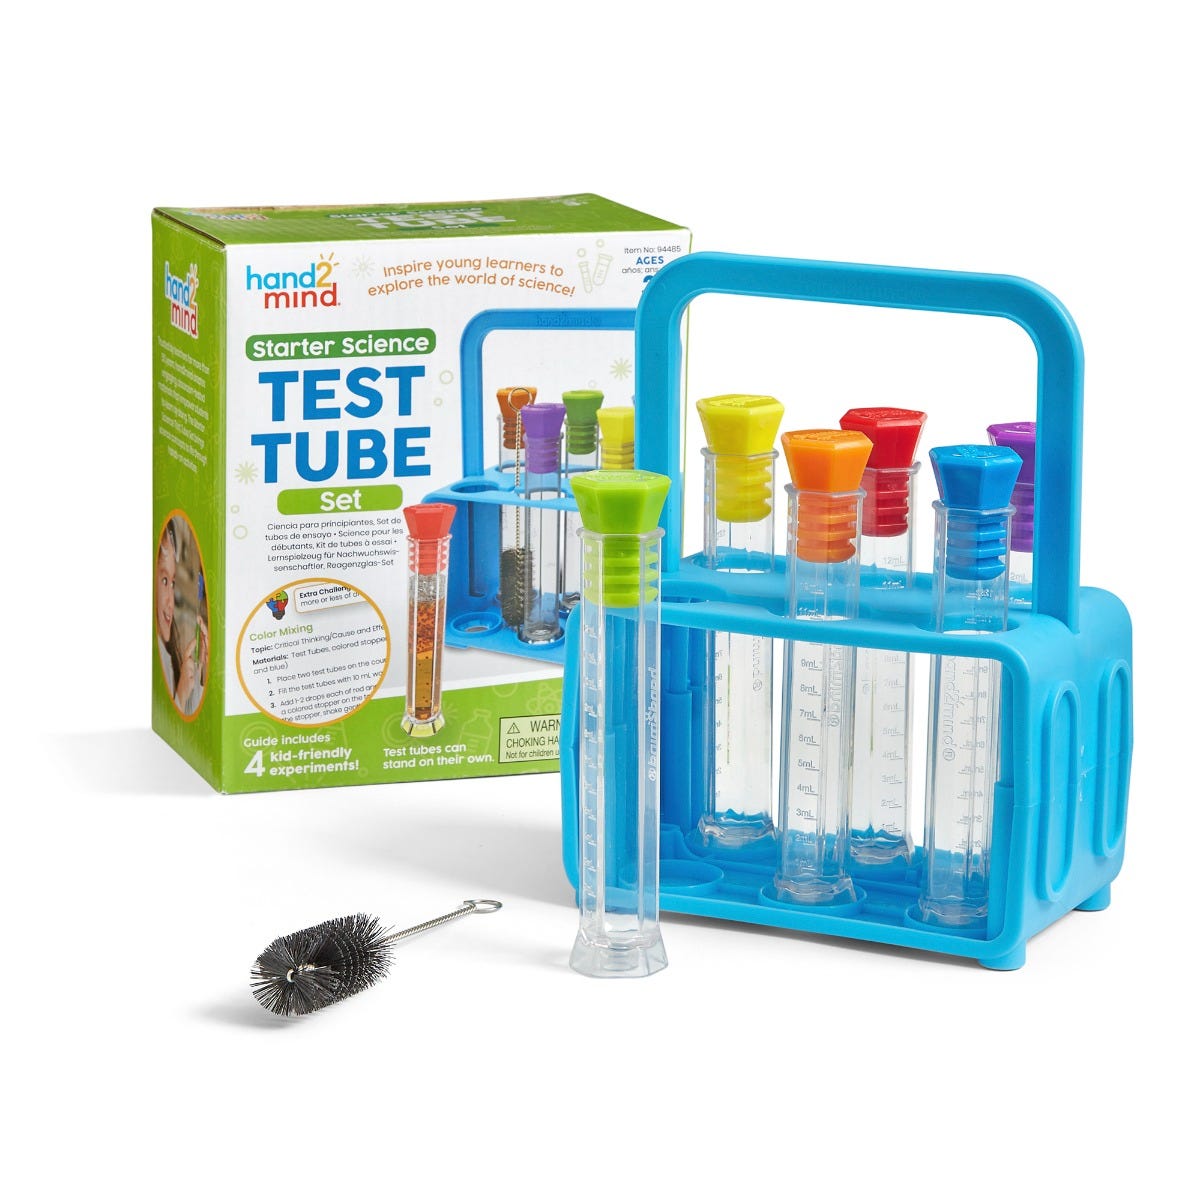 Starter Science Test Tube Set, The Starter Science Test Tube Set will inspire young learners to explore the world of science with 6 test tubes for kids and Activity Guide with 4 child-friendly experiments. Each hexagonal test tube has a base and can stand on their own and has a colourful hexagonal lid. This means these test tubes won’t roll off the table. The test tubes store upright in the convenient carrying rack and are easy to clean using the included cleaning brush. Children will love to experiment, ob